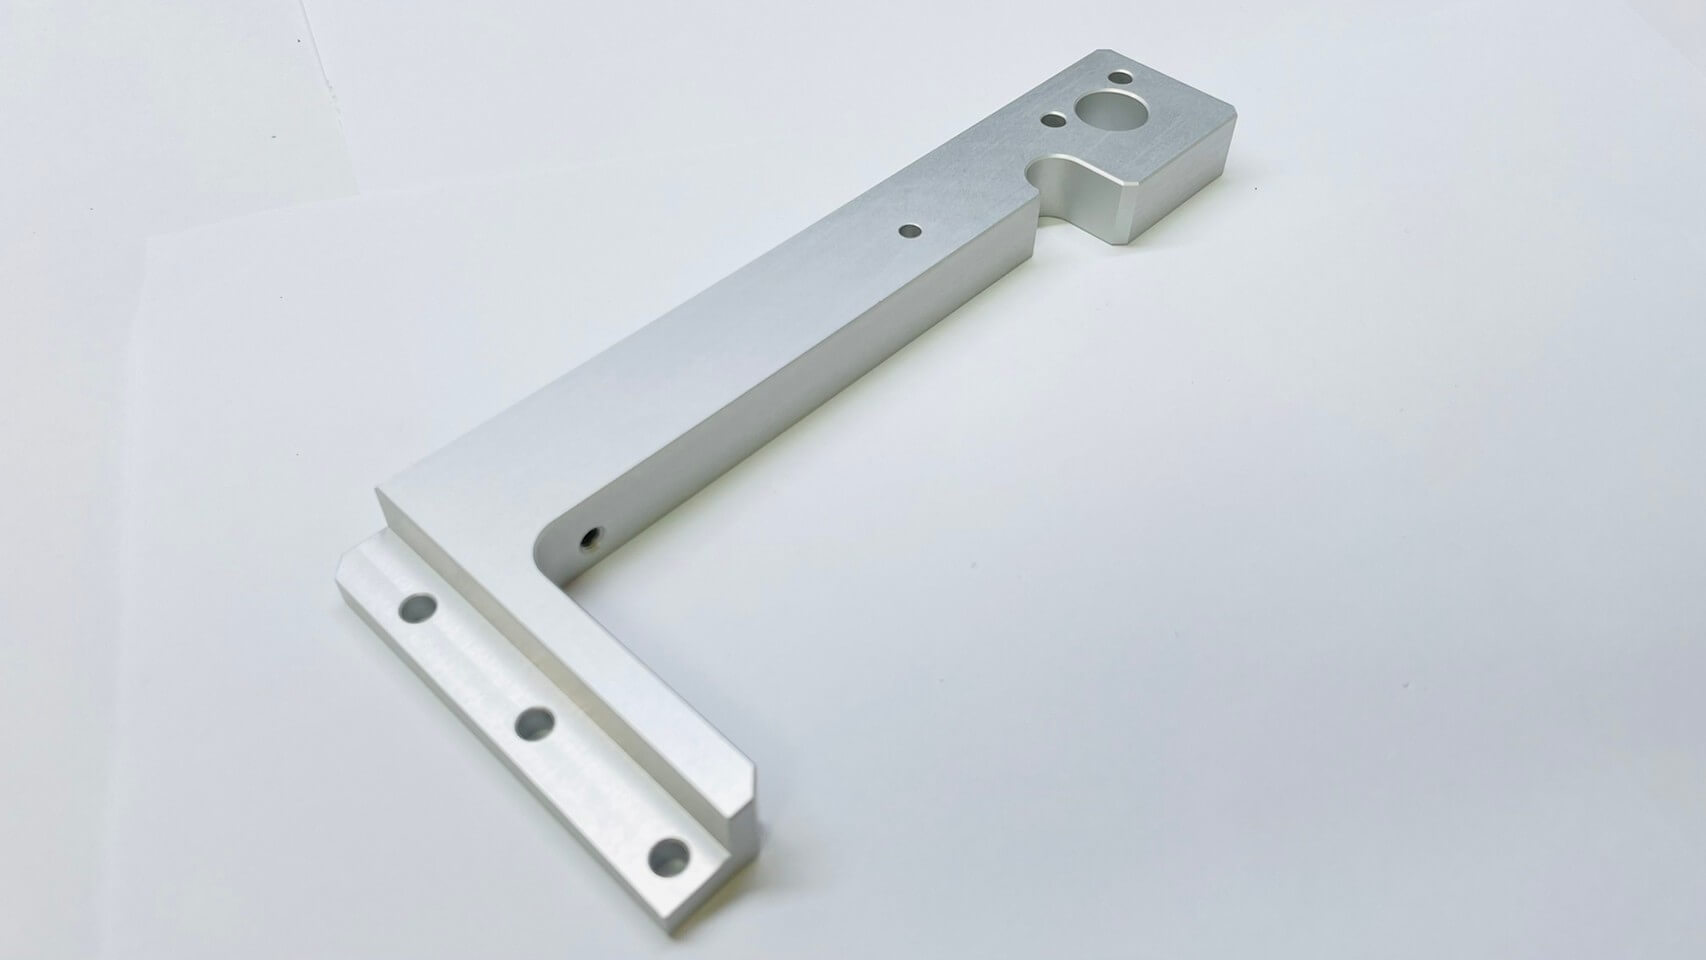 What Are Options Of Materials, Processes, And Finishes For Custom Aluminum Parts?